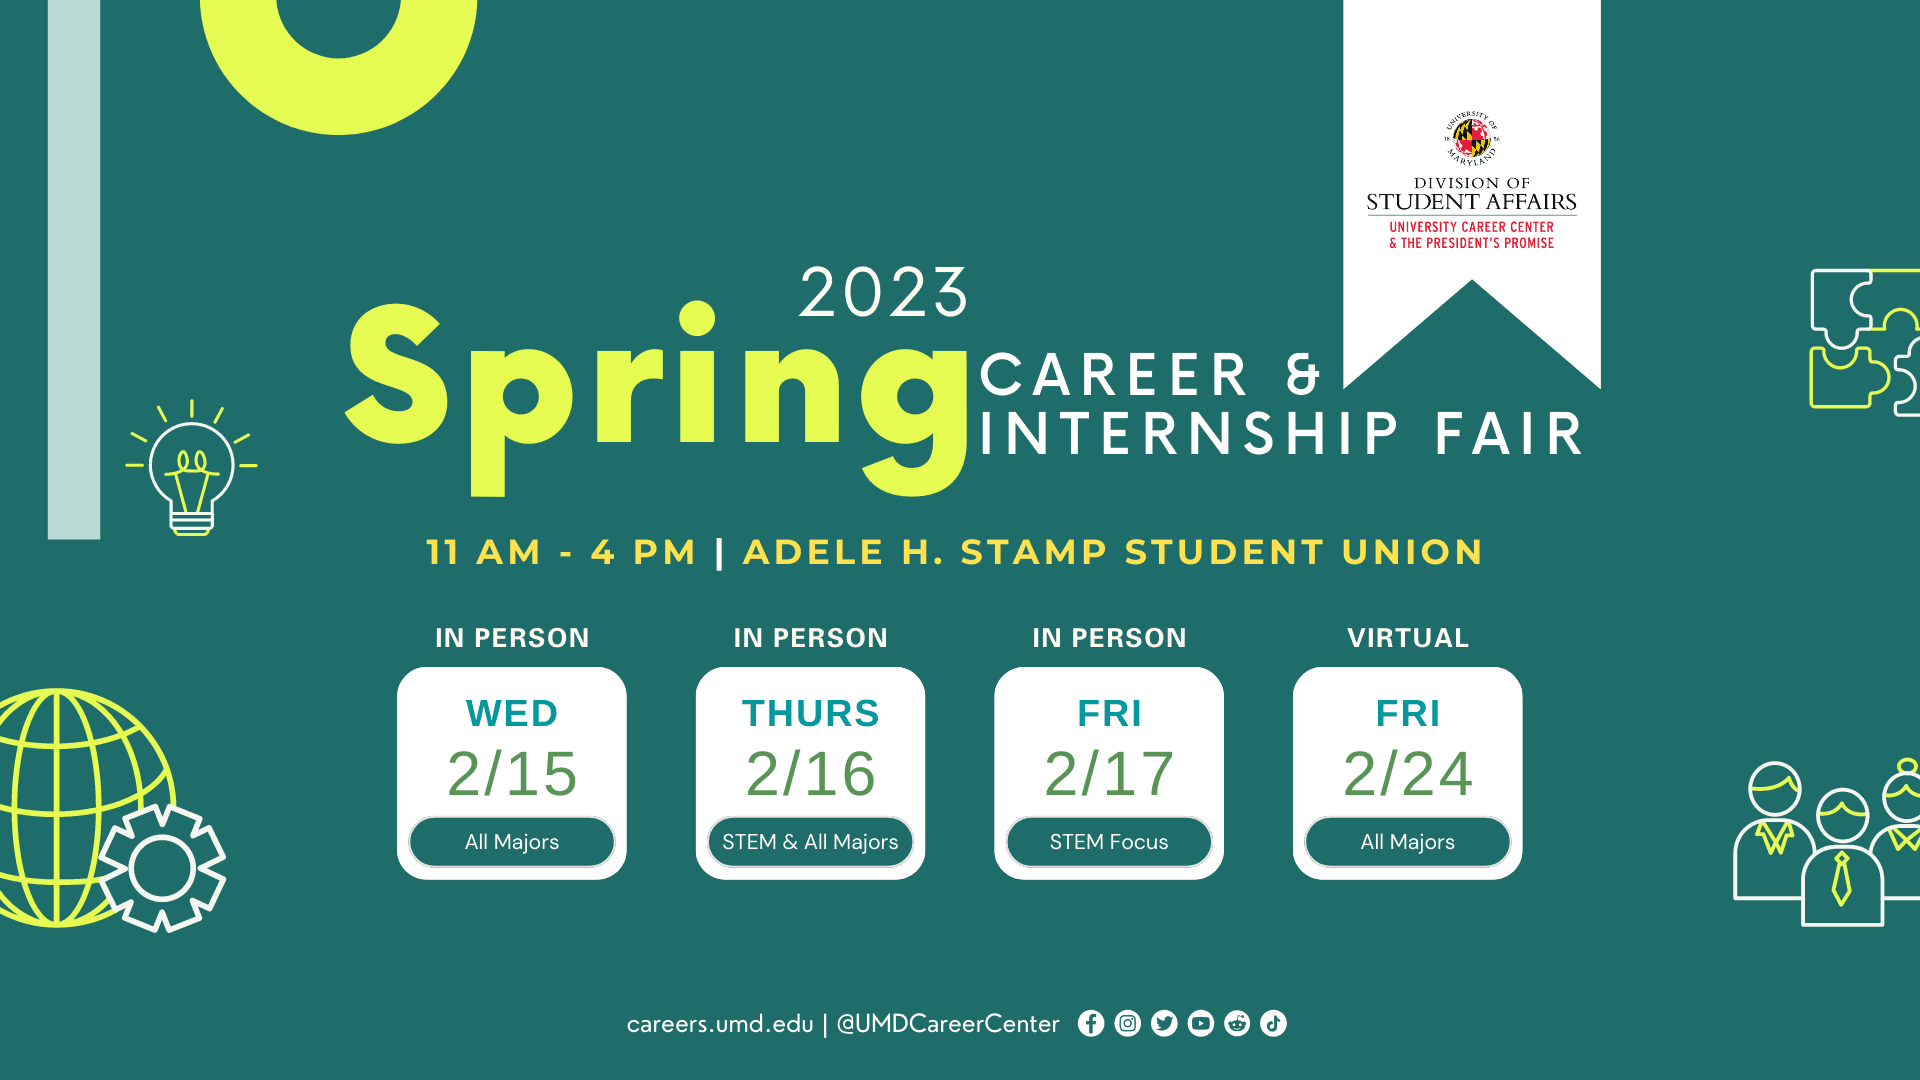 A promotional image for the 2023 Spring Career & Internship Fair